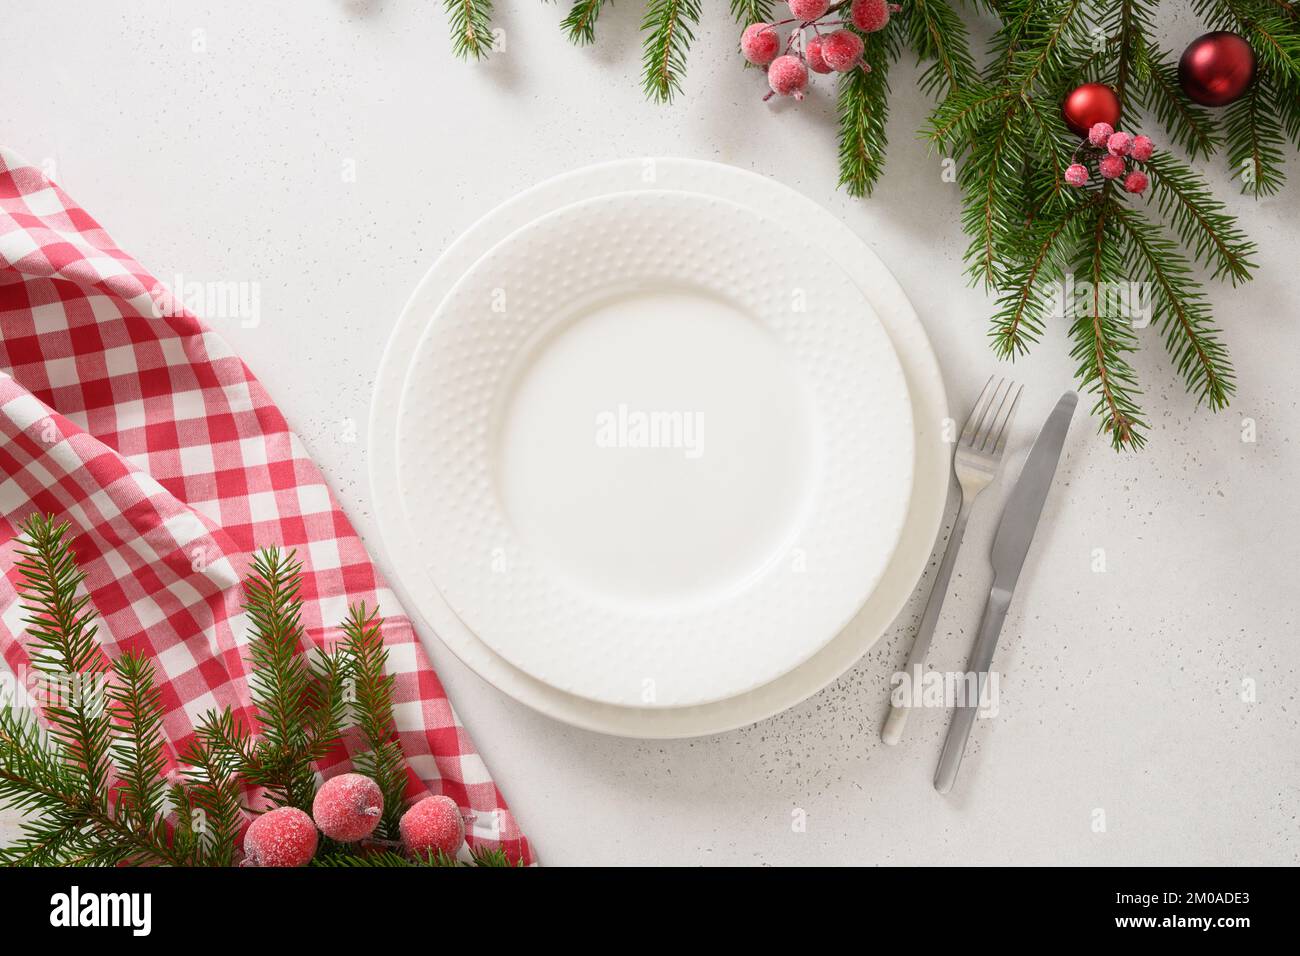 Christmas table setting with red decorative berries on white background. View from above. Copy space. Xmas dinner. Template for festive menu. Stock Photo